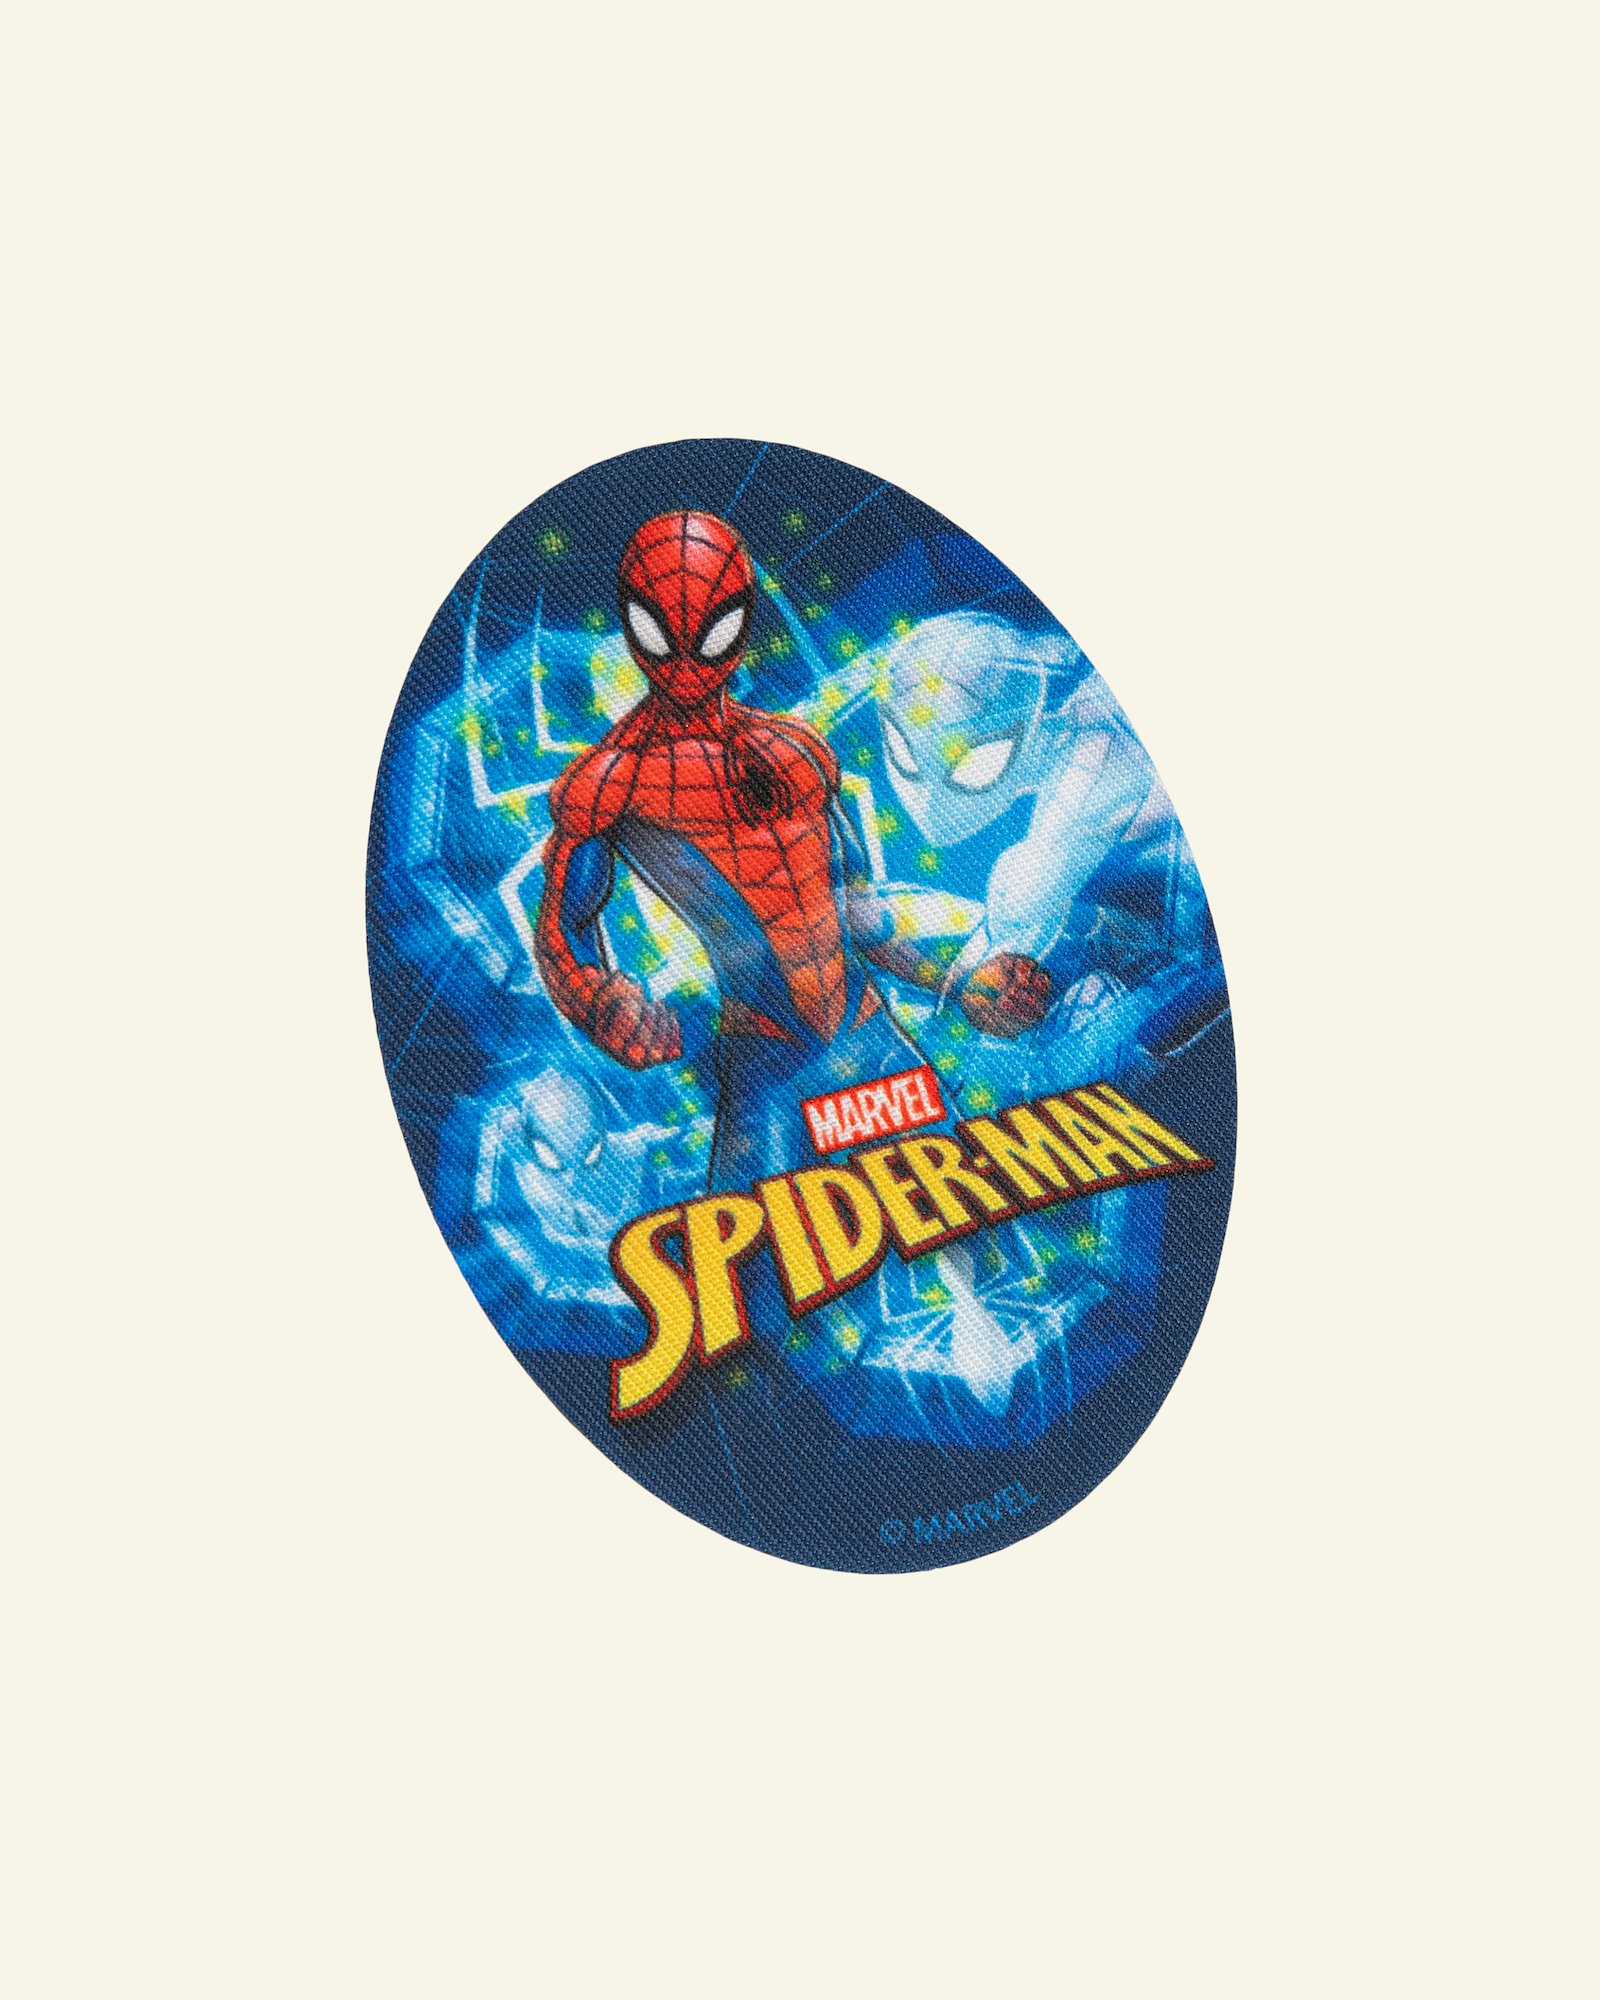 Patch Spiderman 110x80mm blue/red 1pcs 24951_pack